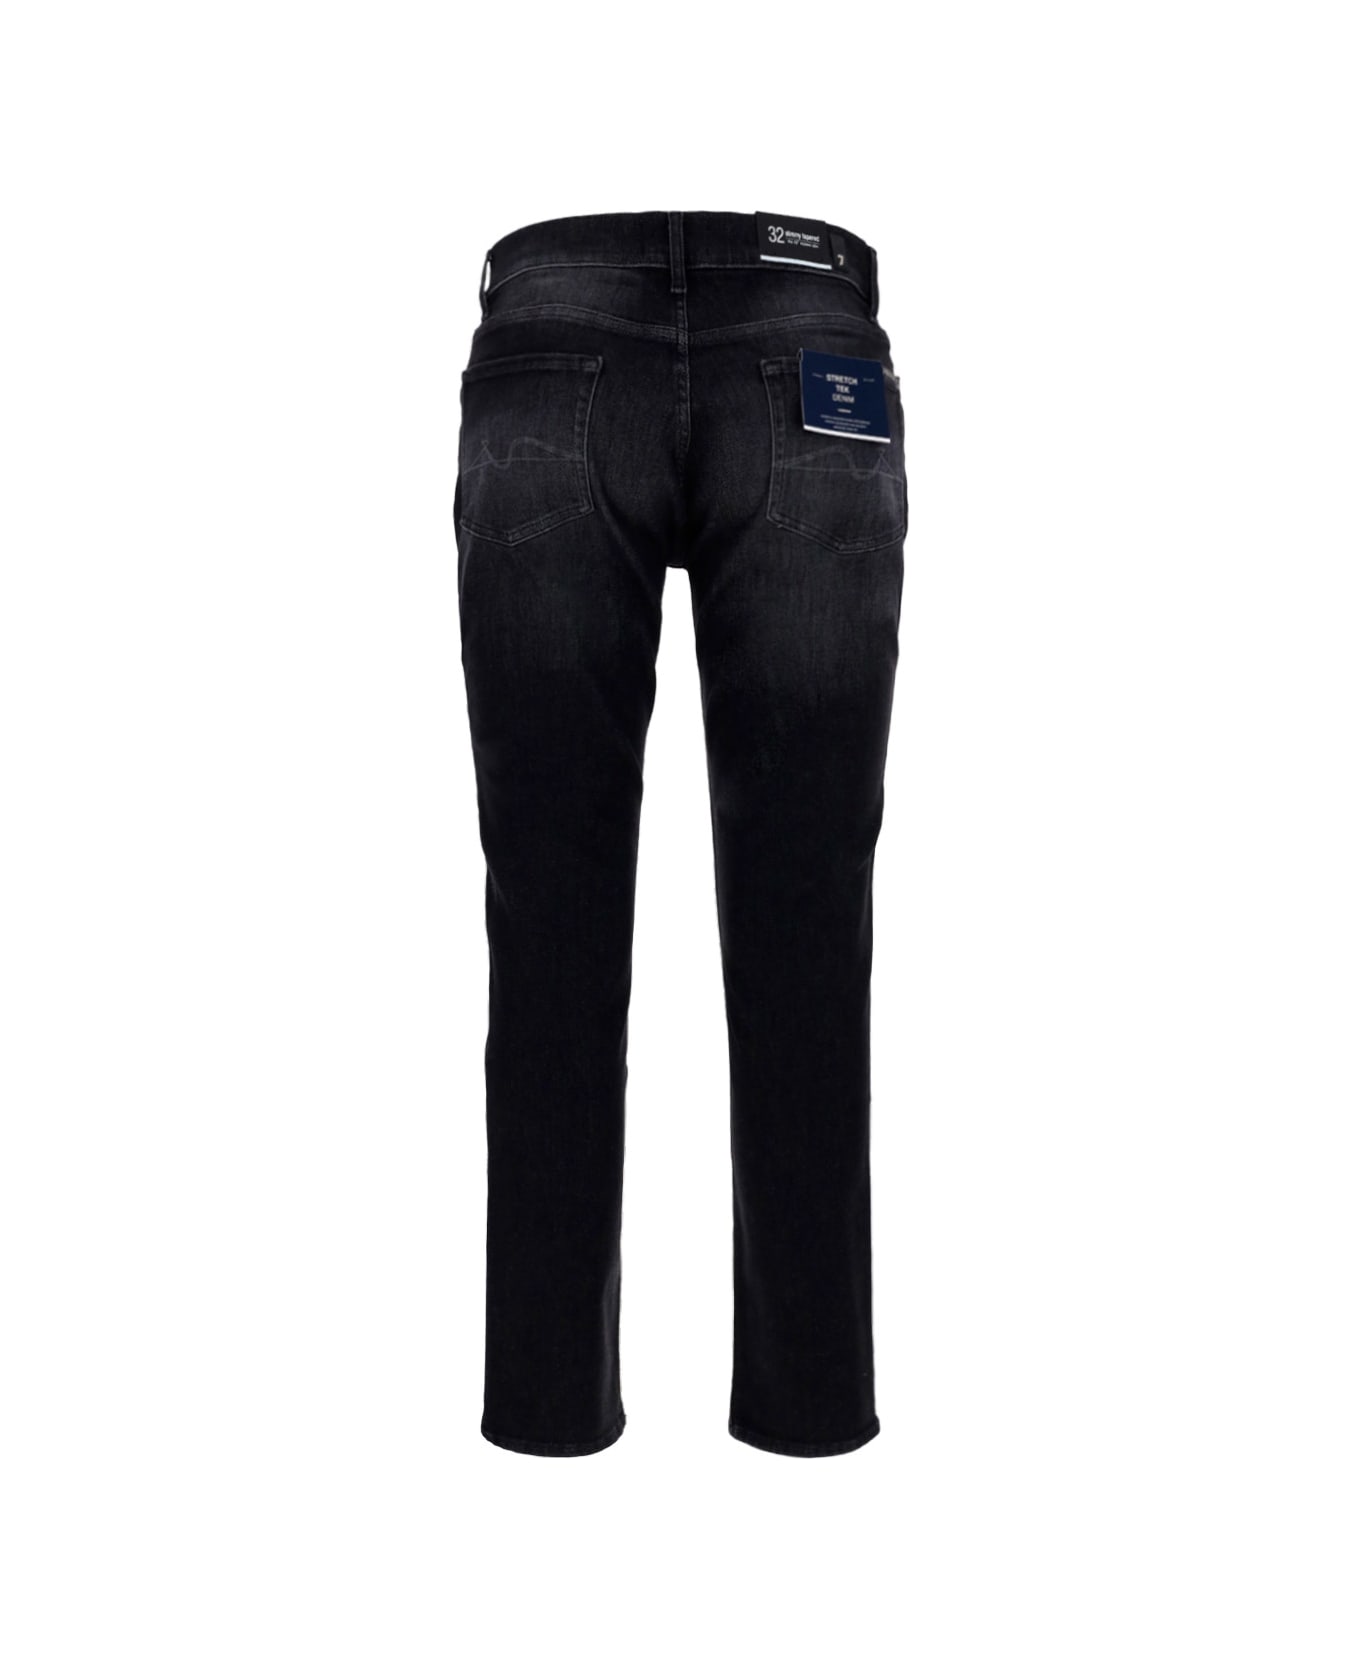 7 For All Mankind 7for Jeans - Black